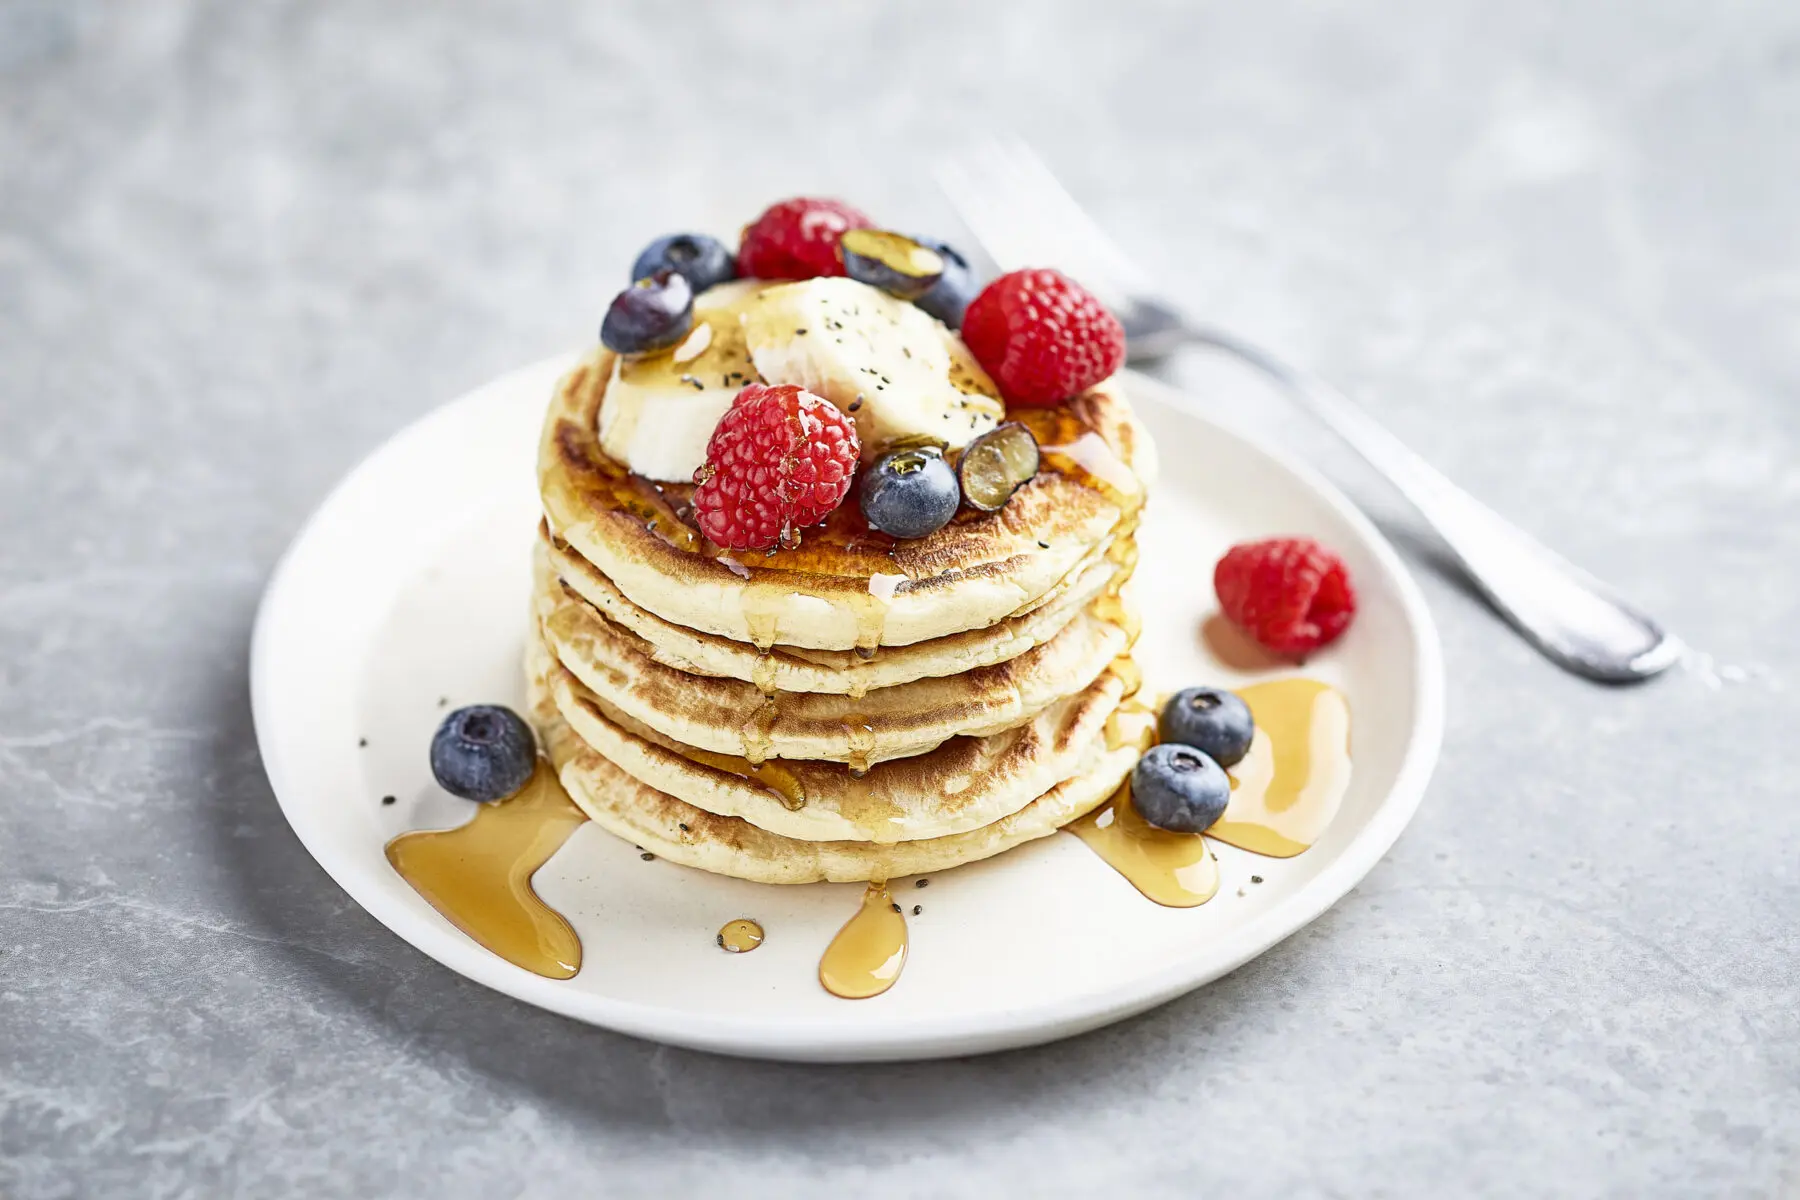 A stack of American Style Pancakes baked using Marriage's Flour dressed with fruit and a drizzle of maple syrup